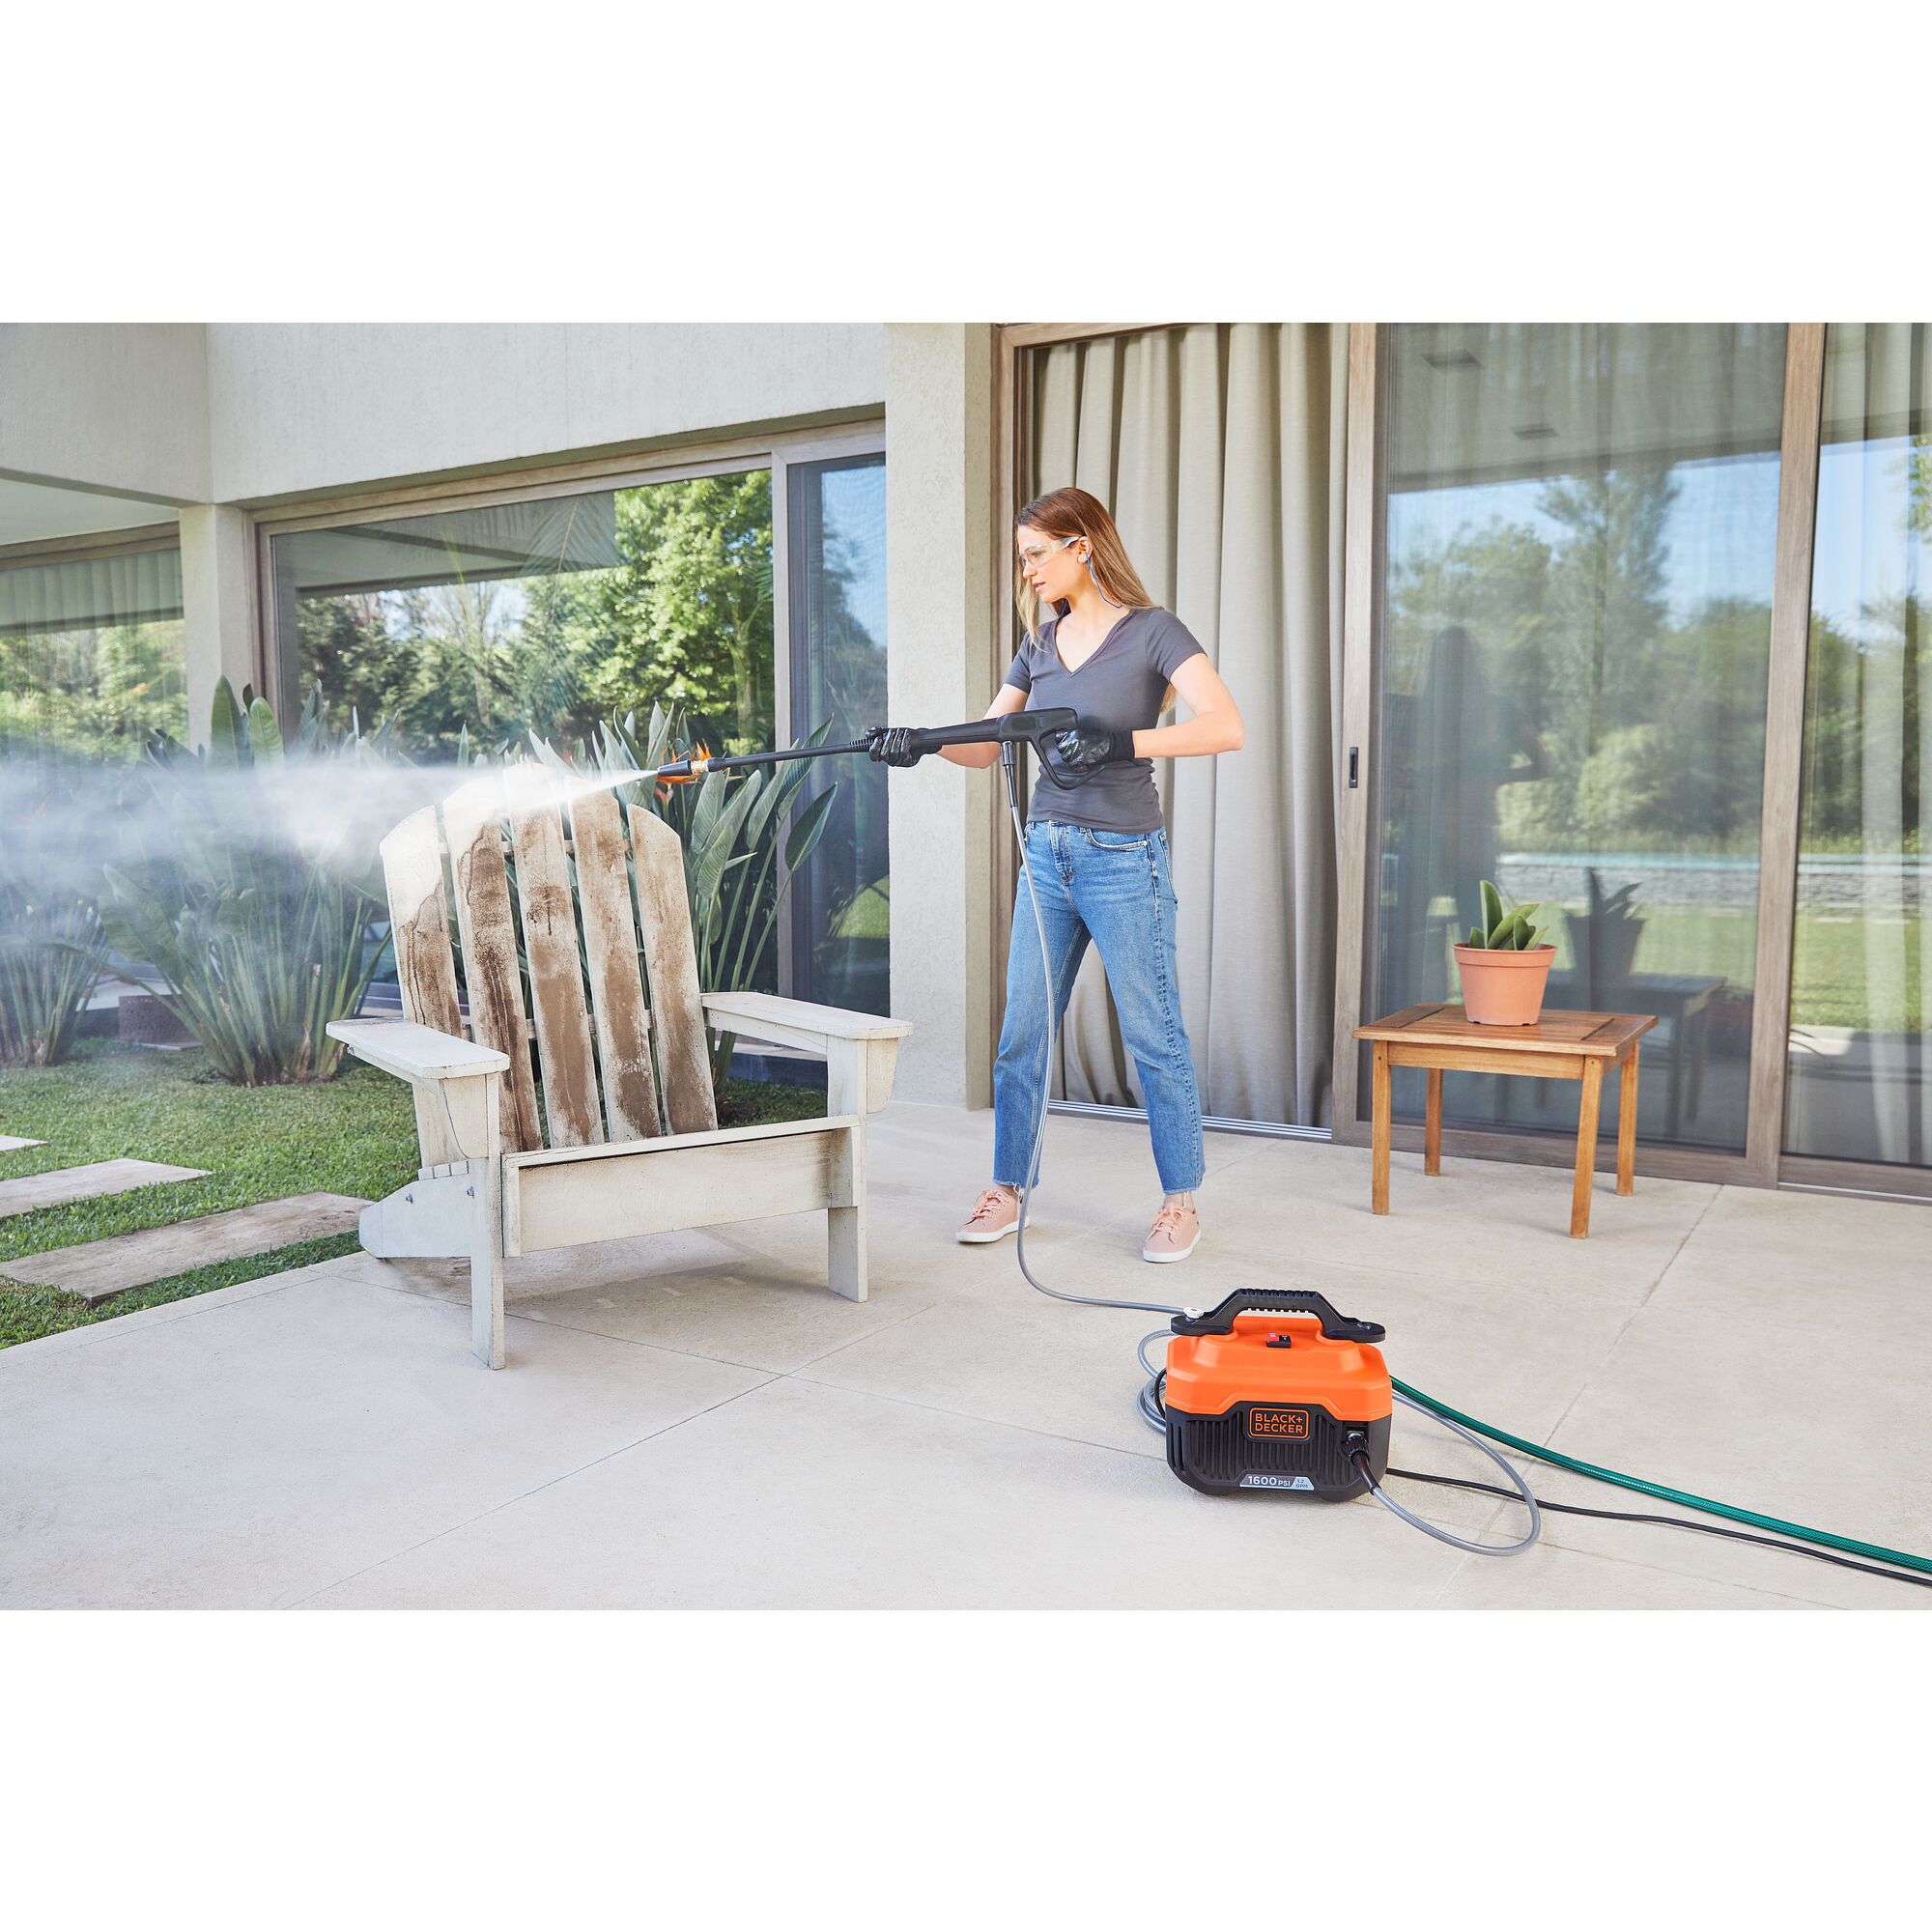 Person using Black and decker 1600-Psi 1.2-Gpm Pressure Washer to clean outdoor furniture